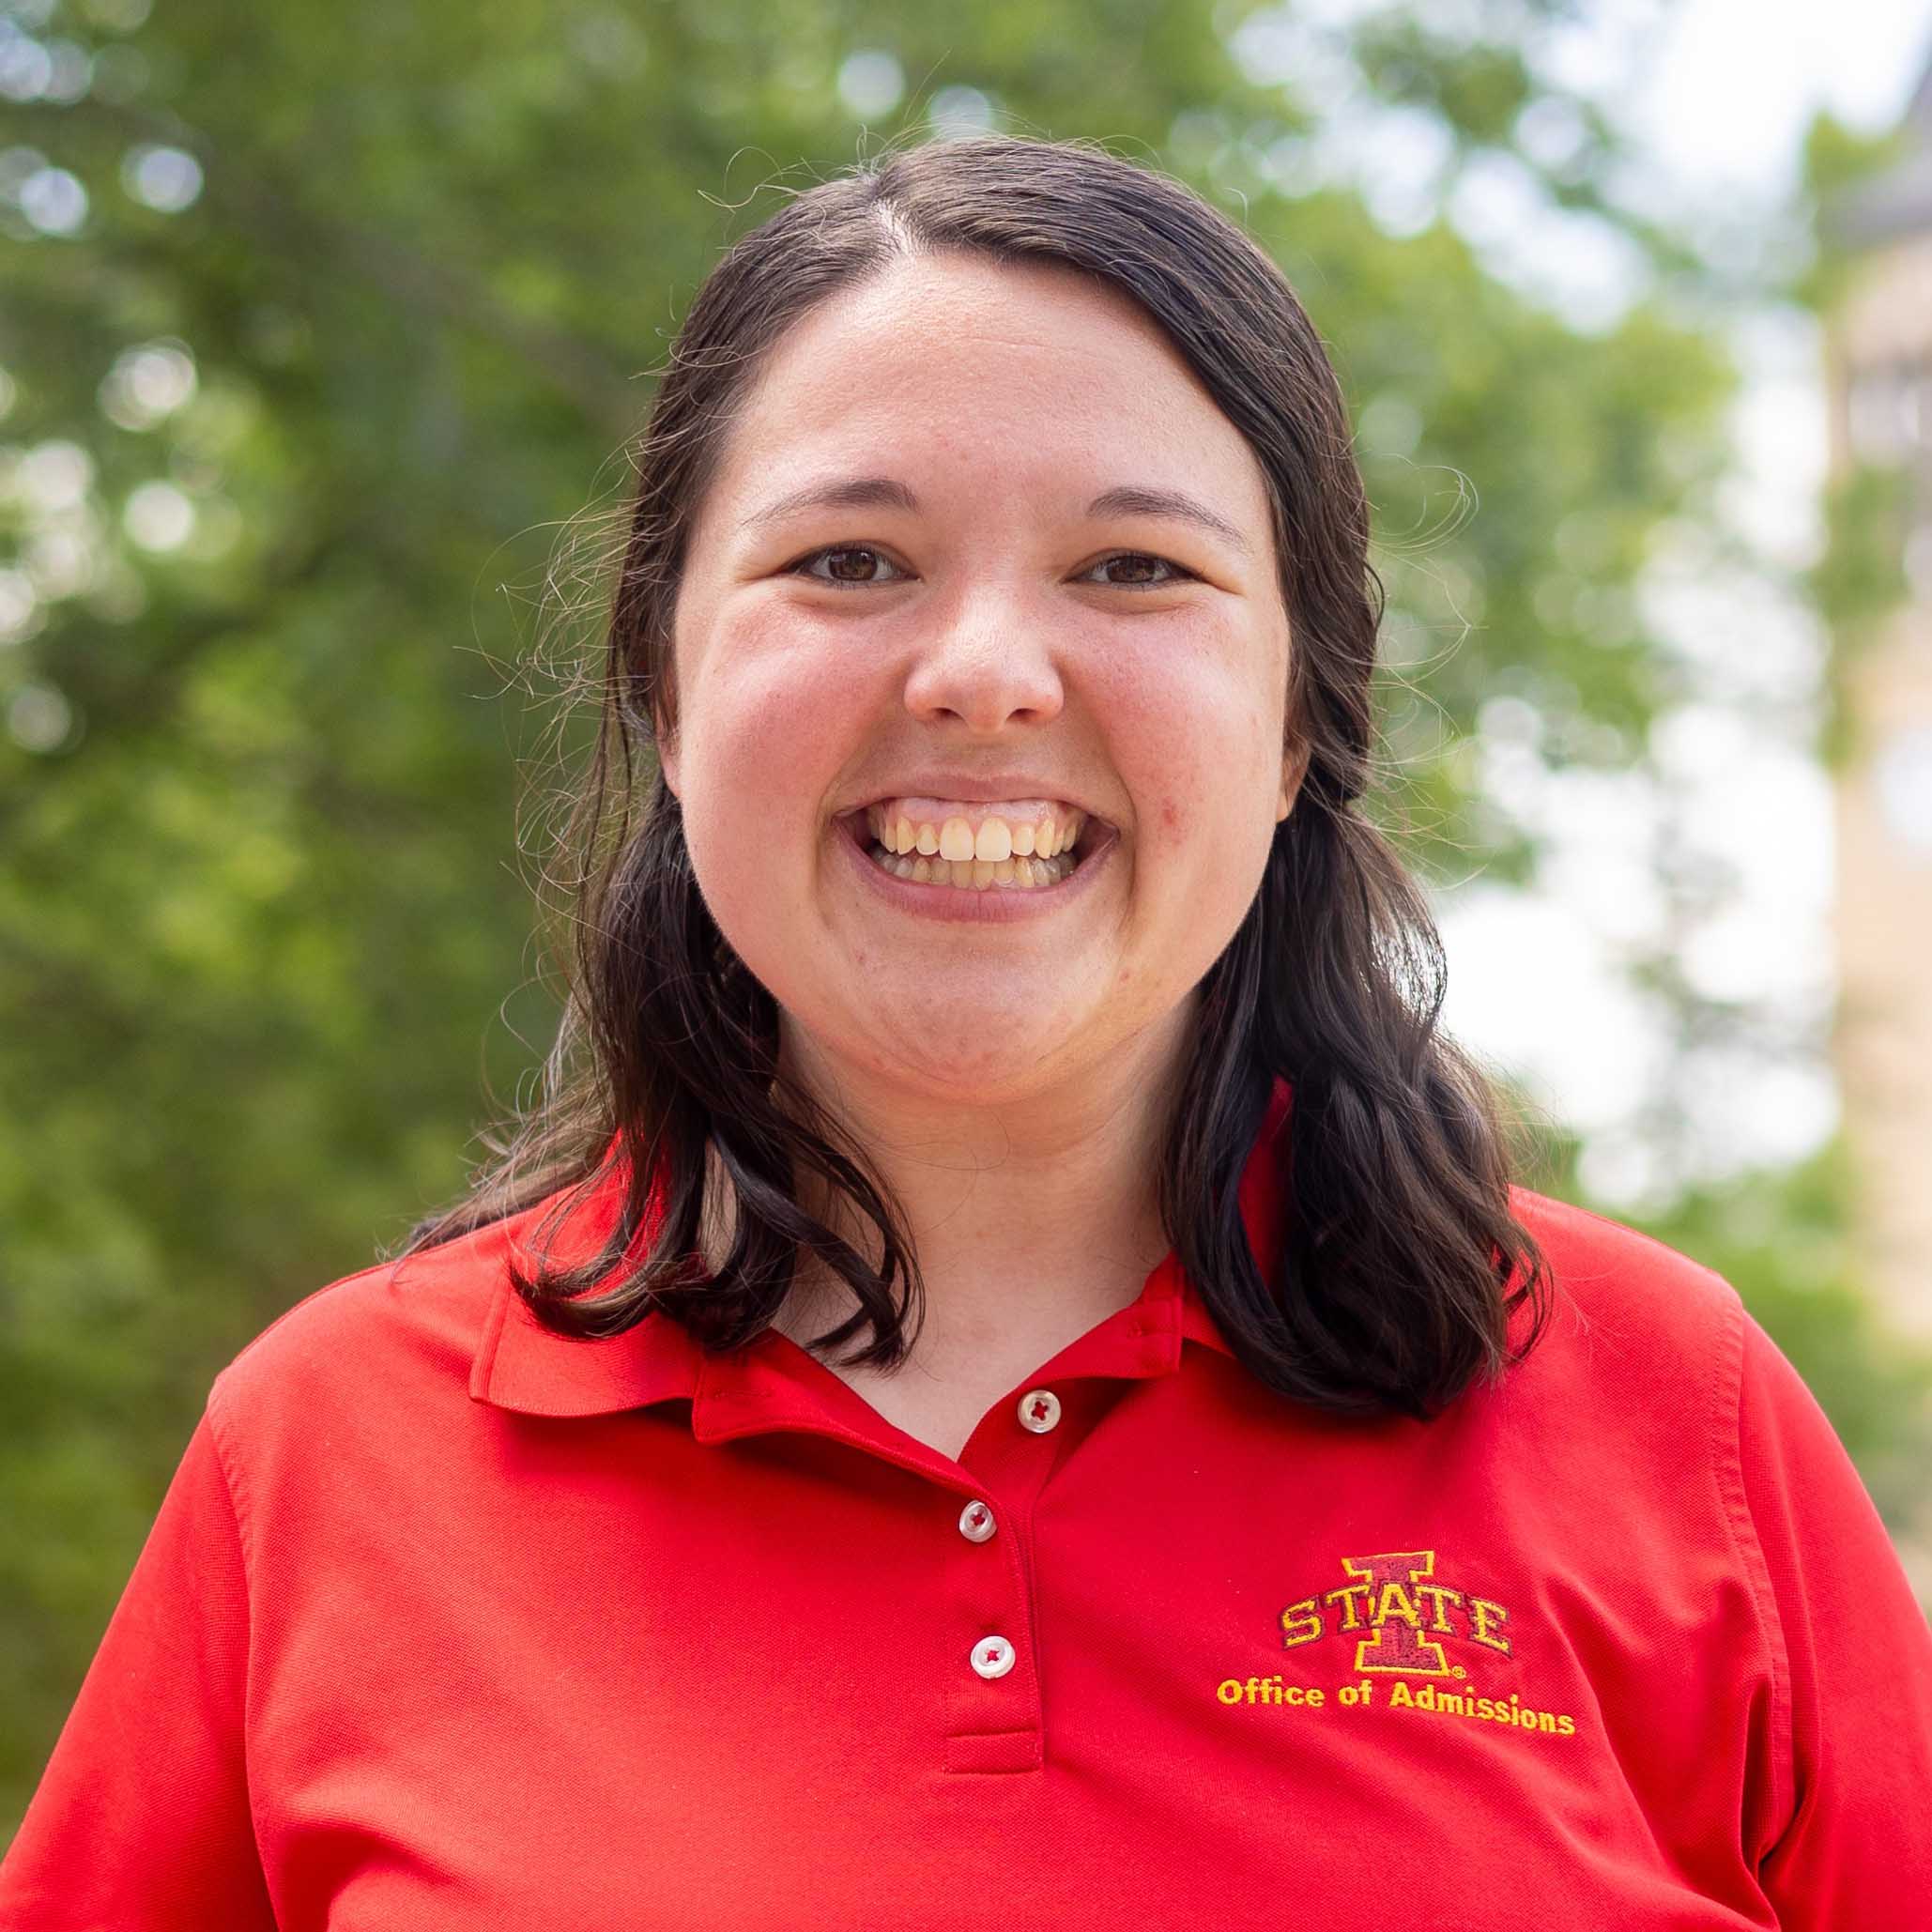 Alyssa McMichael, admissions counselor